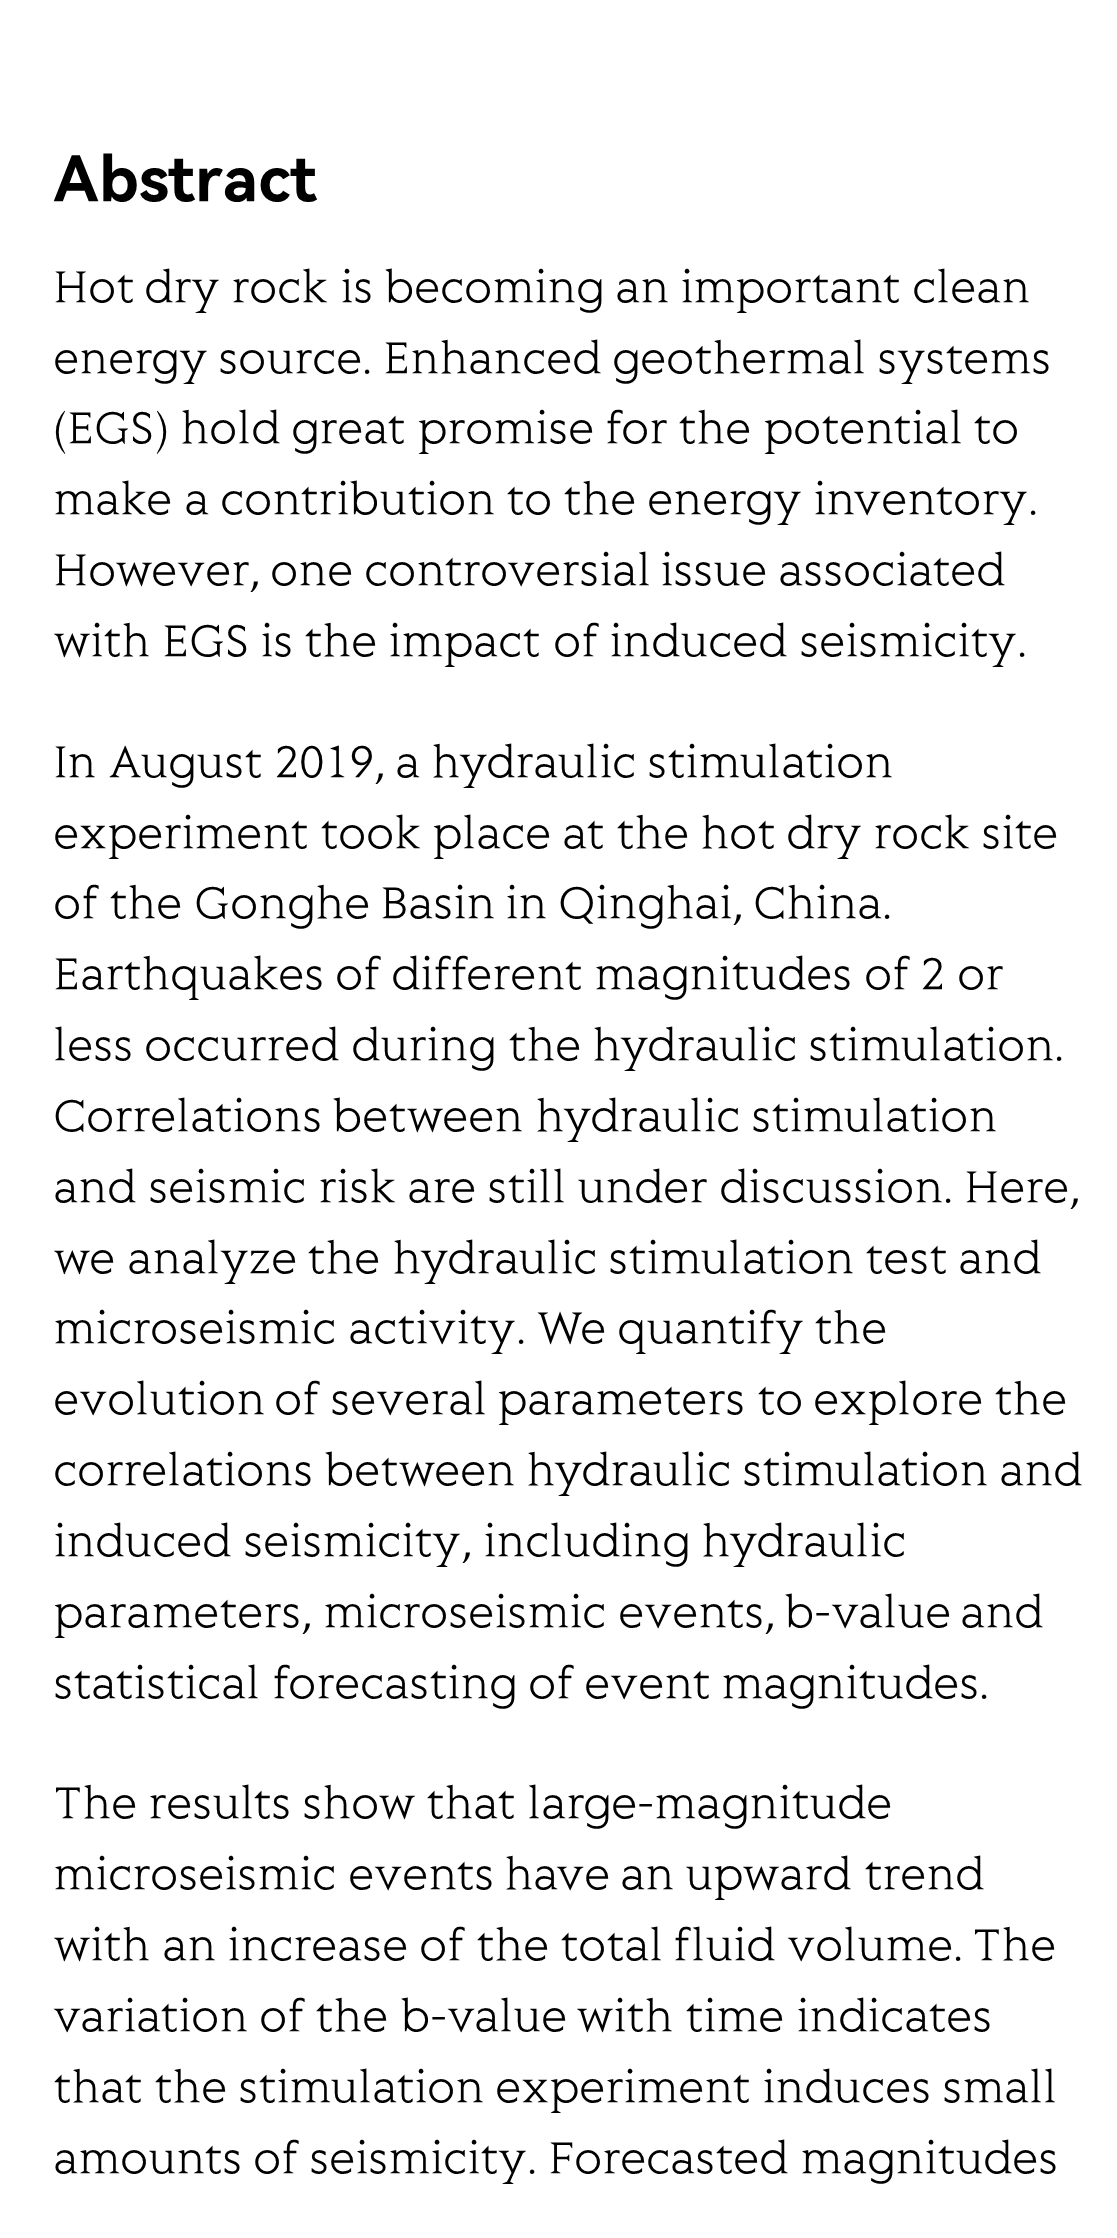 Hydraulic Fracturing-induced Seismicity at the Hot Dry Rock Site of the Gonghe Basin in China_2